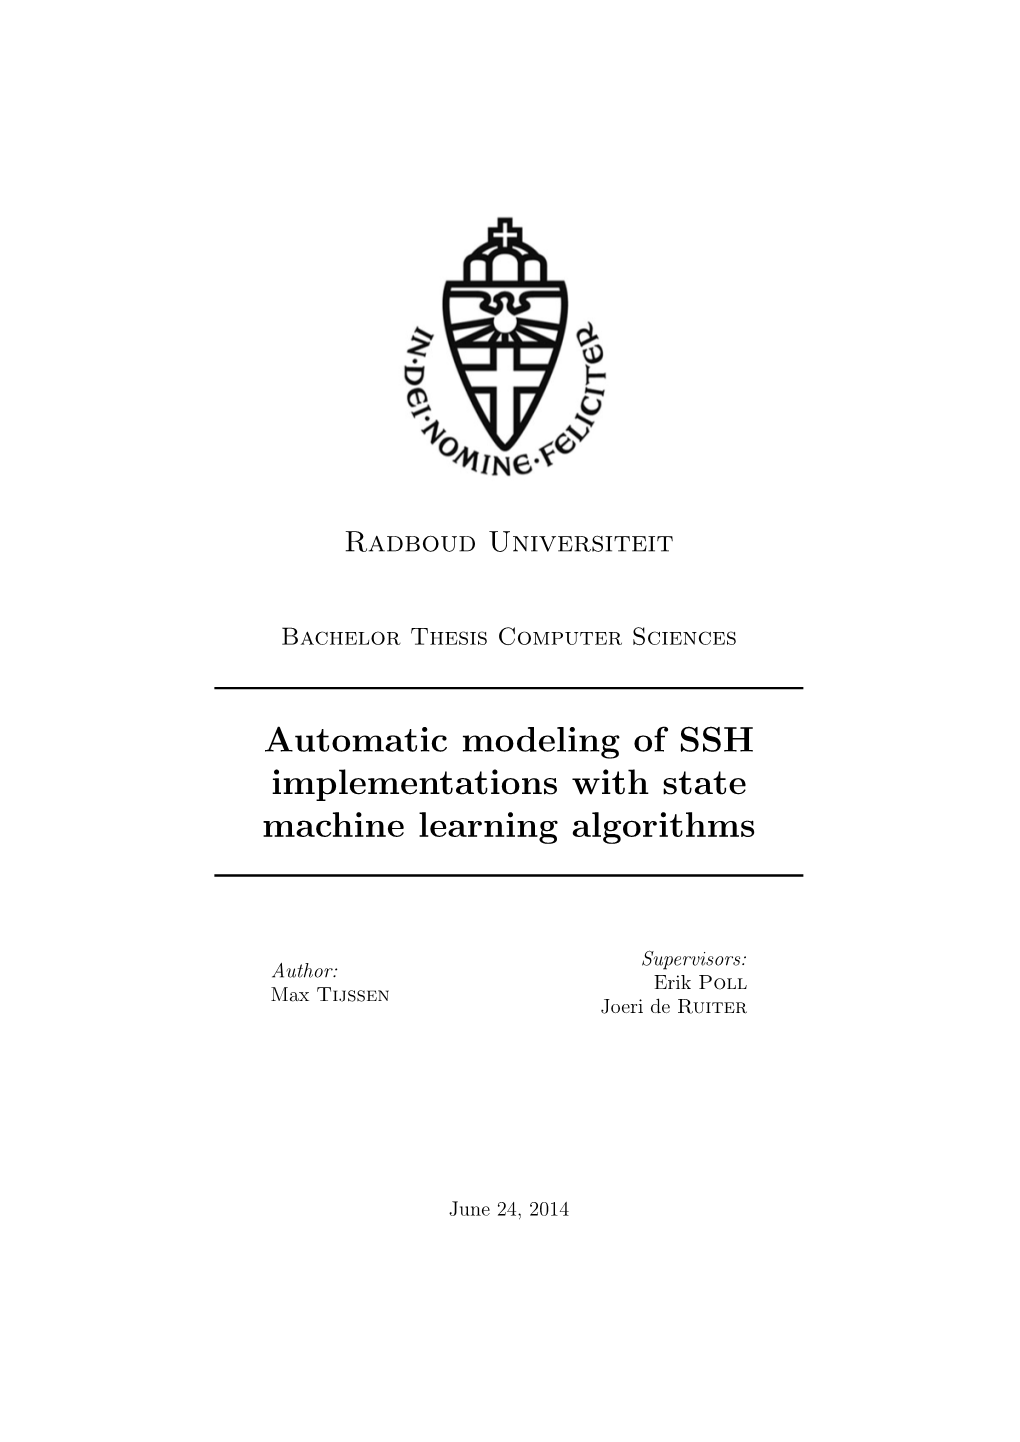 Automatic Modeling of SSH Implementations with State Machine Learning Algorithms